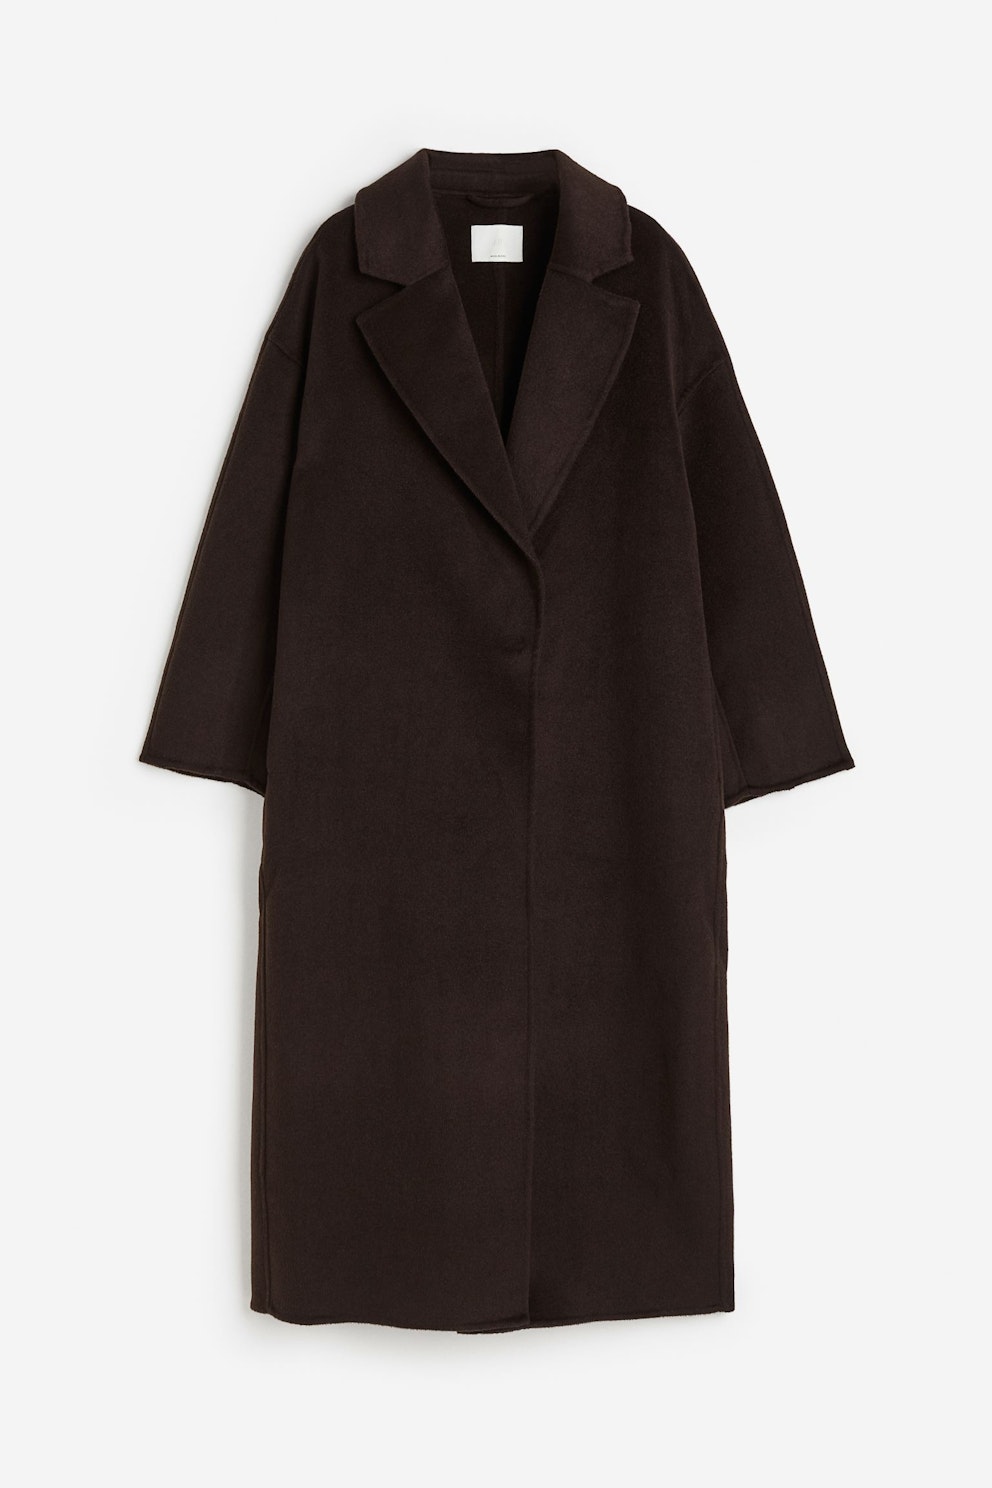 The 11 Best Wool Coats That Will Carry You Through This Winter